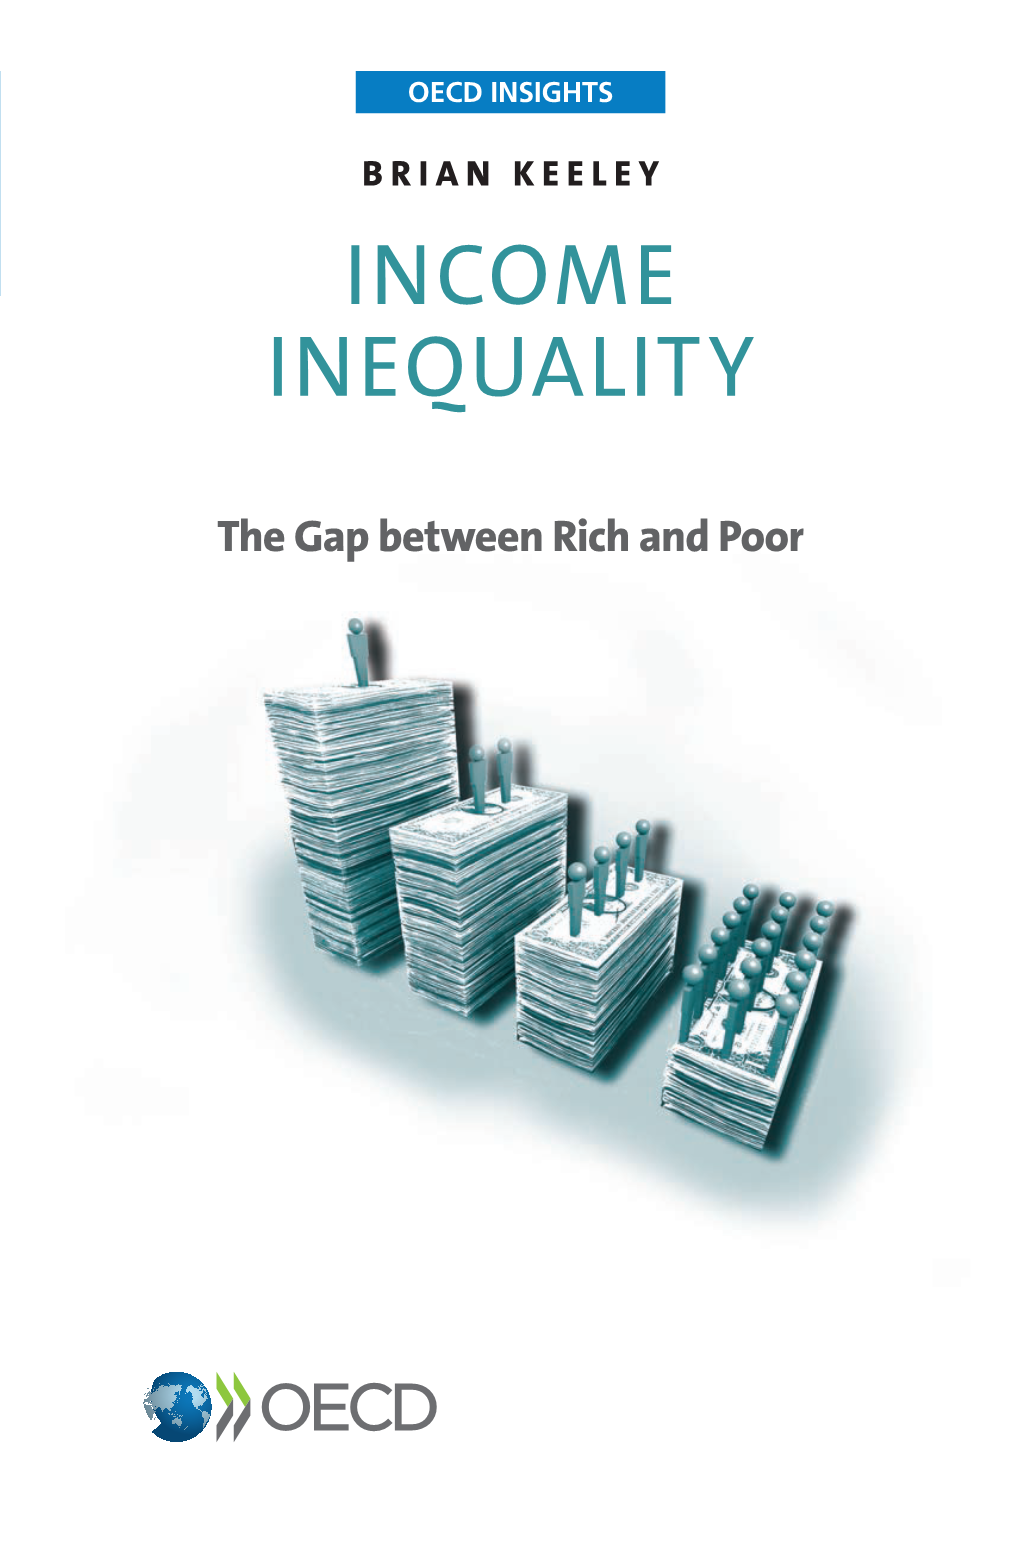 Income Inequality: the Gap Between Rich and Poor, OECD Insights, OECD Publishing, Paris